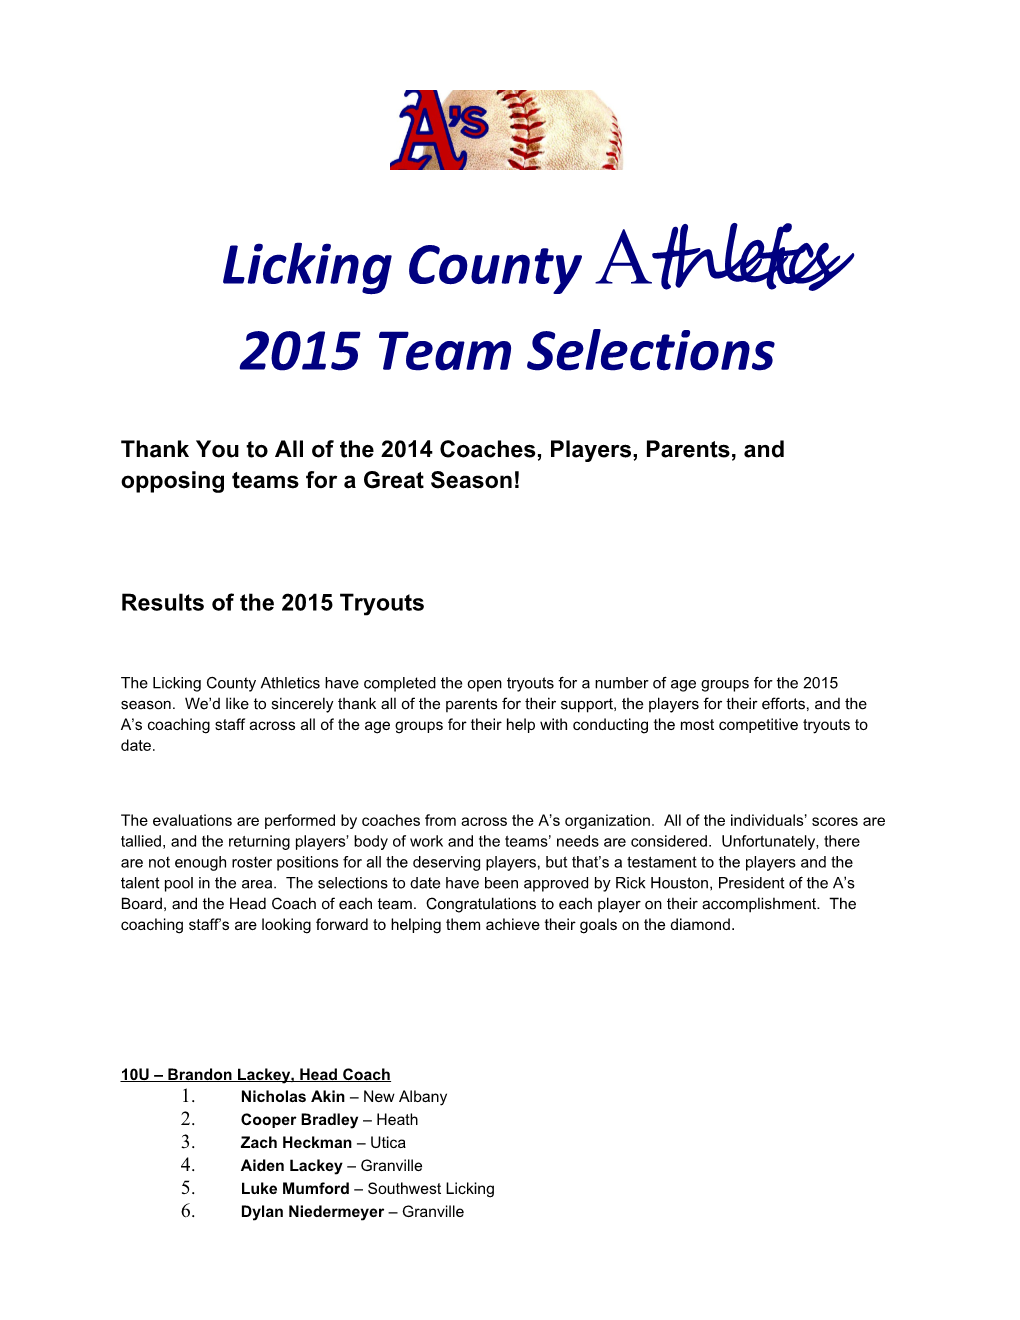 2015 Team Selections